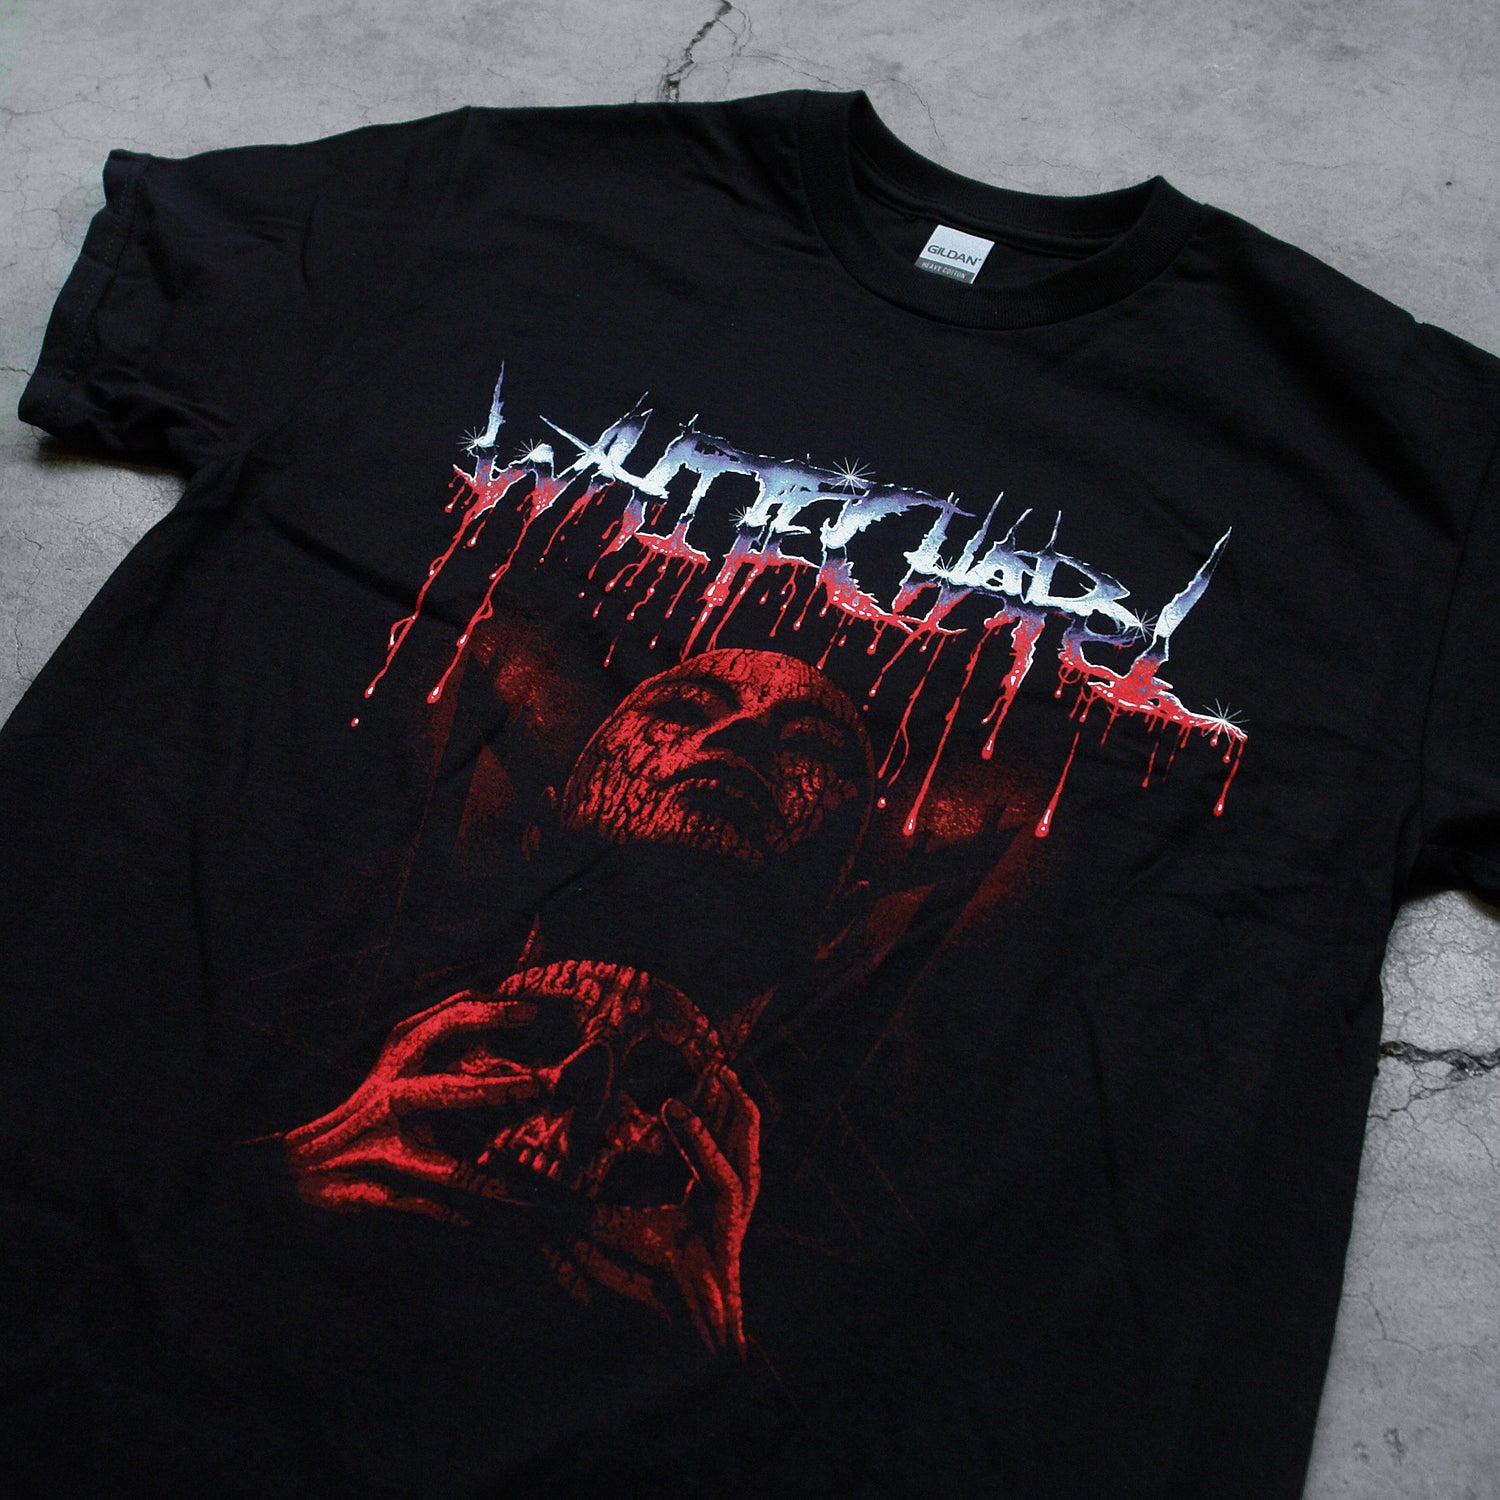 close up Image of the front of a black tshirt against a concrete grey background. Across the chest in a blue to white to red gradient color reads "whitechapel". This is in a heavy metal font and the red is dripping. Below this is a red graphic of a person's face with their eyes closed, head up. They have blood on them and are clutching a skull.